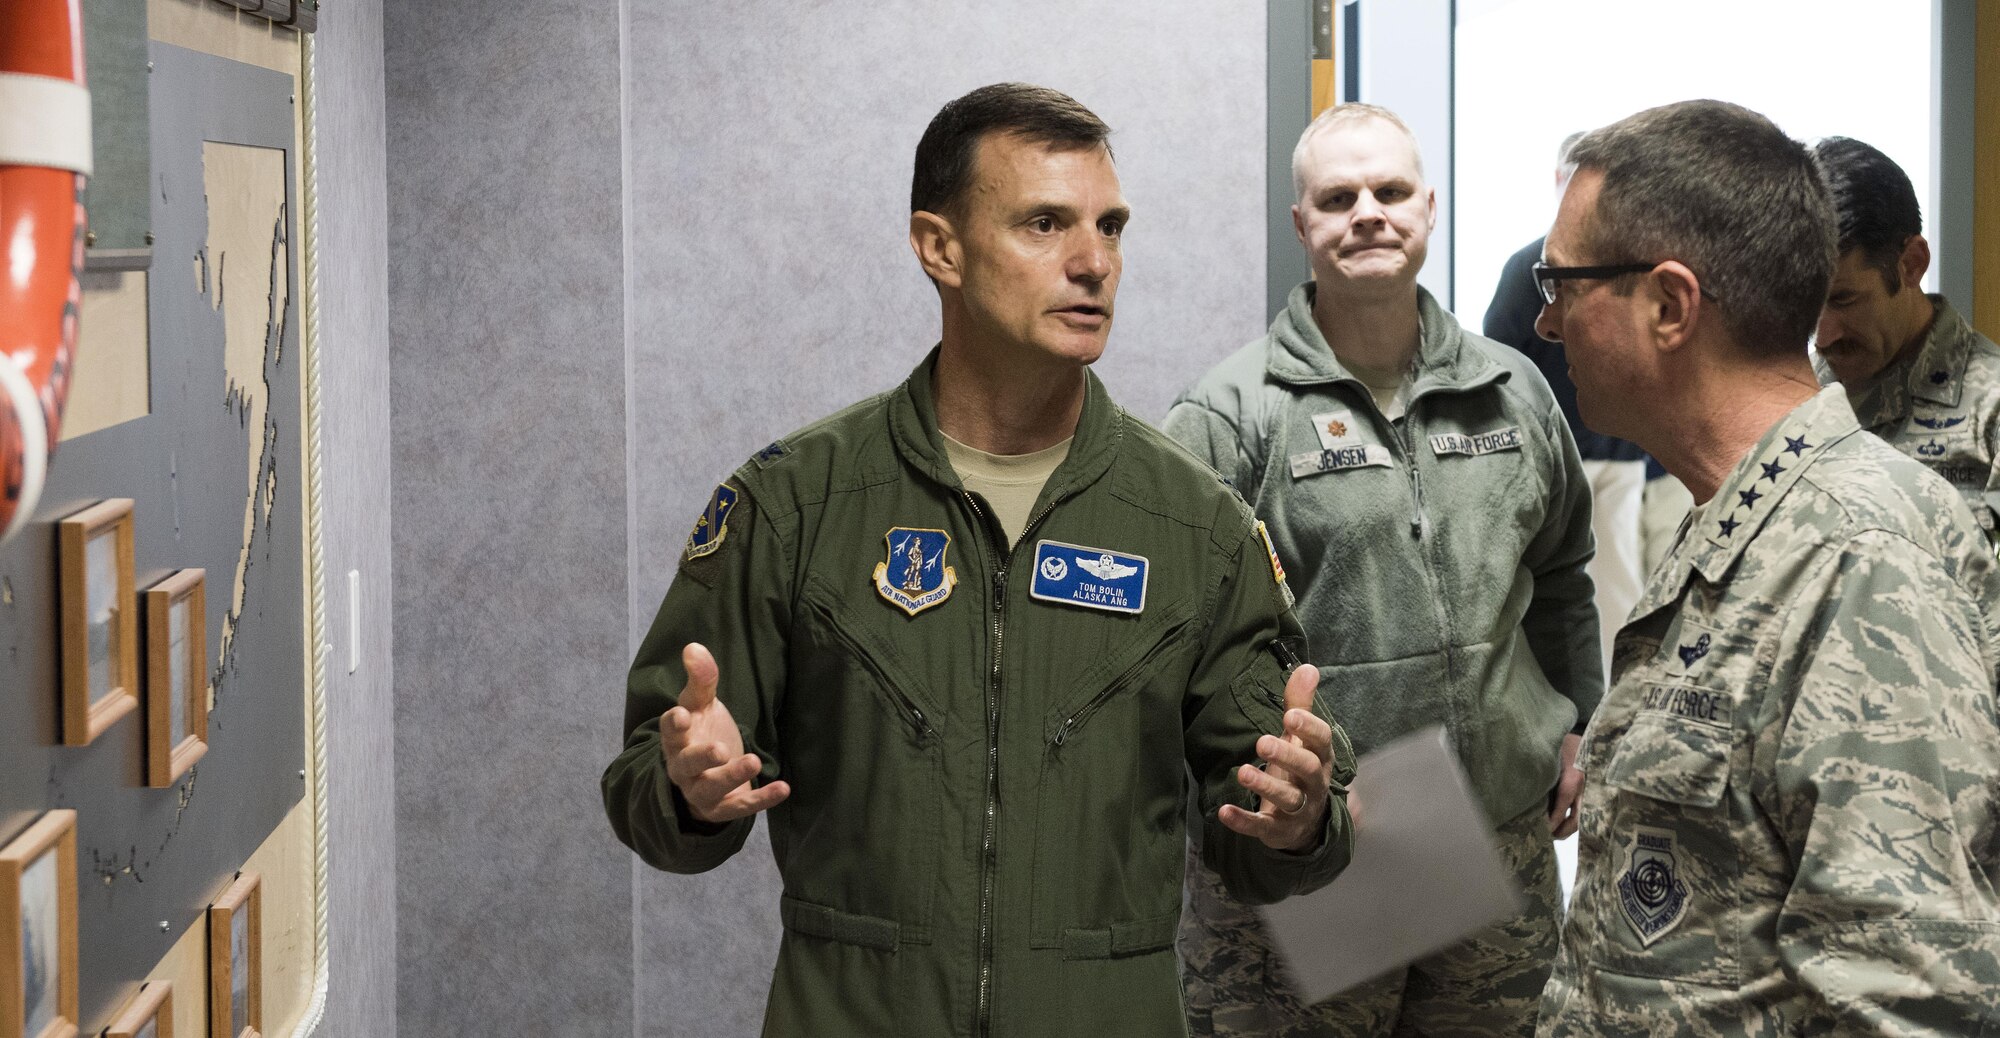 Gen. Joseph L. Lengyel (right) discusses the capabilities of the Alaska Air National Guard's 176th Operations Group with Col. Thomas Bolin, the group's commander, here May 7, 2017. Lengyel visited the 176th Wing as part of a wider tour of Alaska National Guard installations. While here, he met with the wing's senior leaders, toured maintenance facilities, and met and fielded questions from Airmen of all ranks.